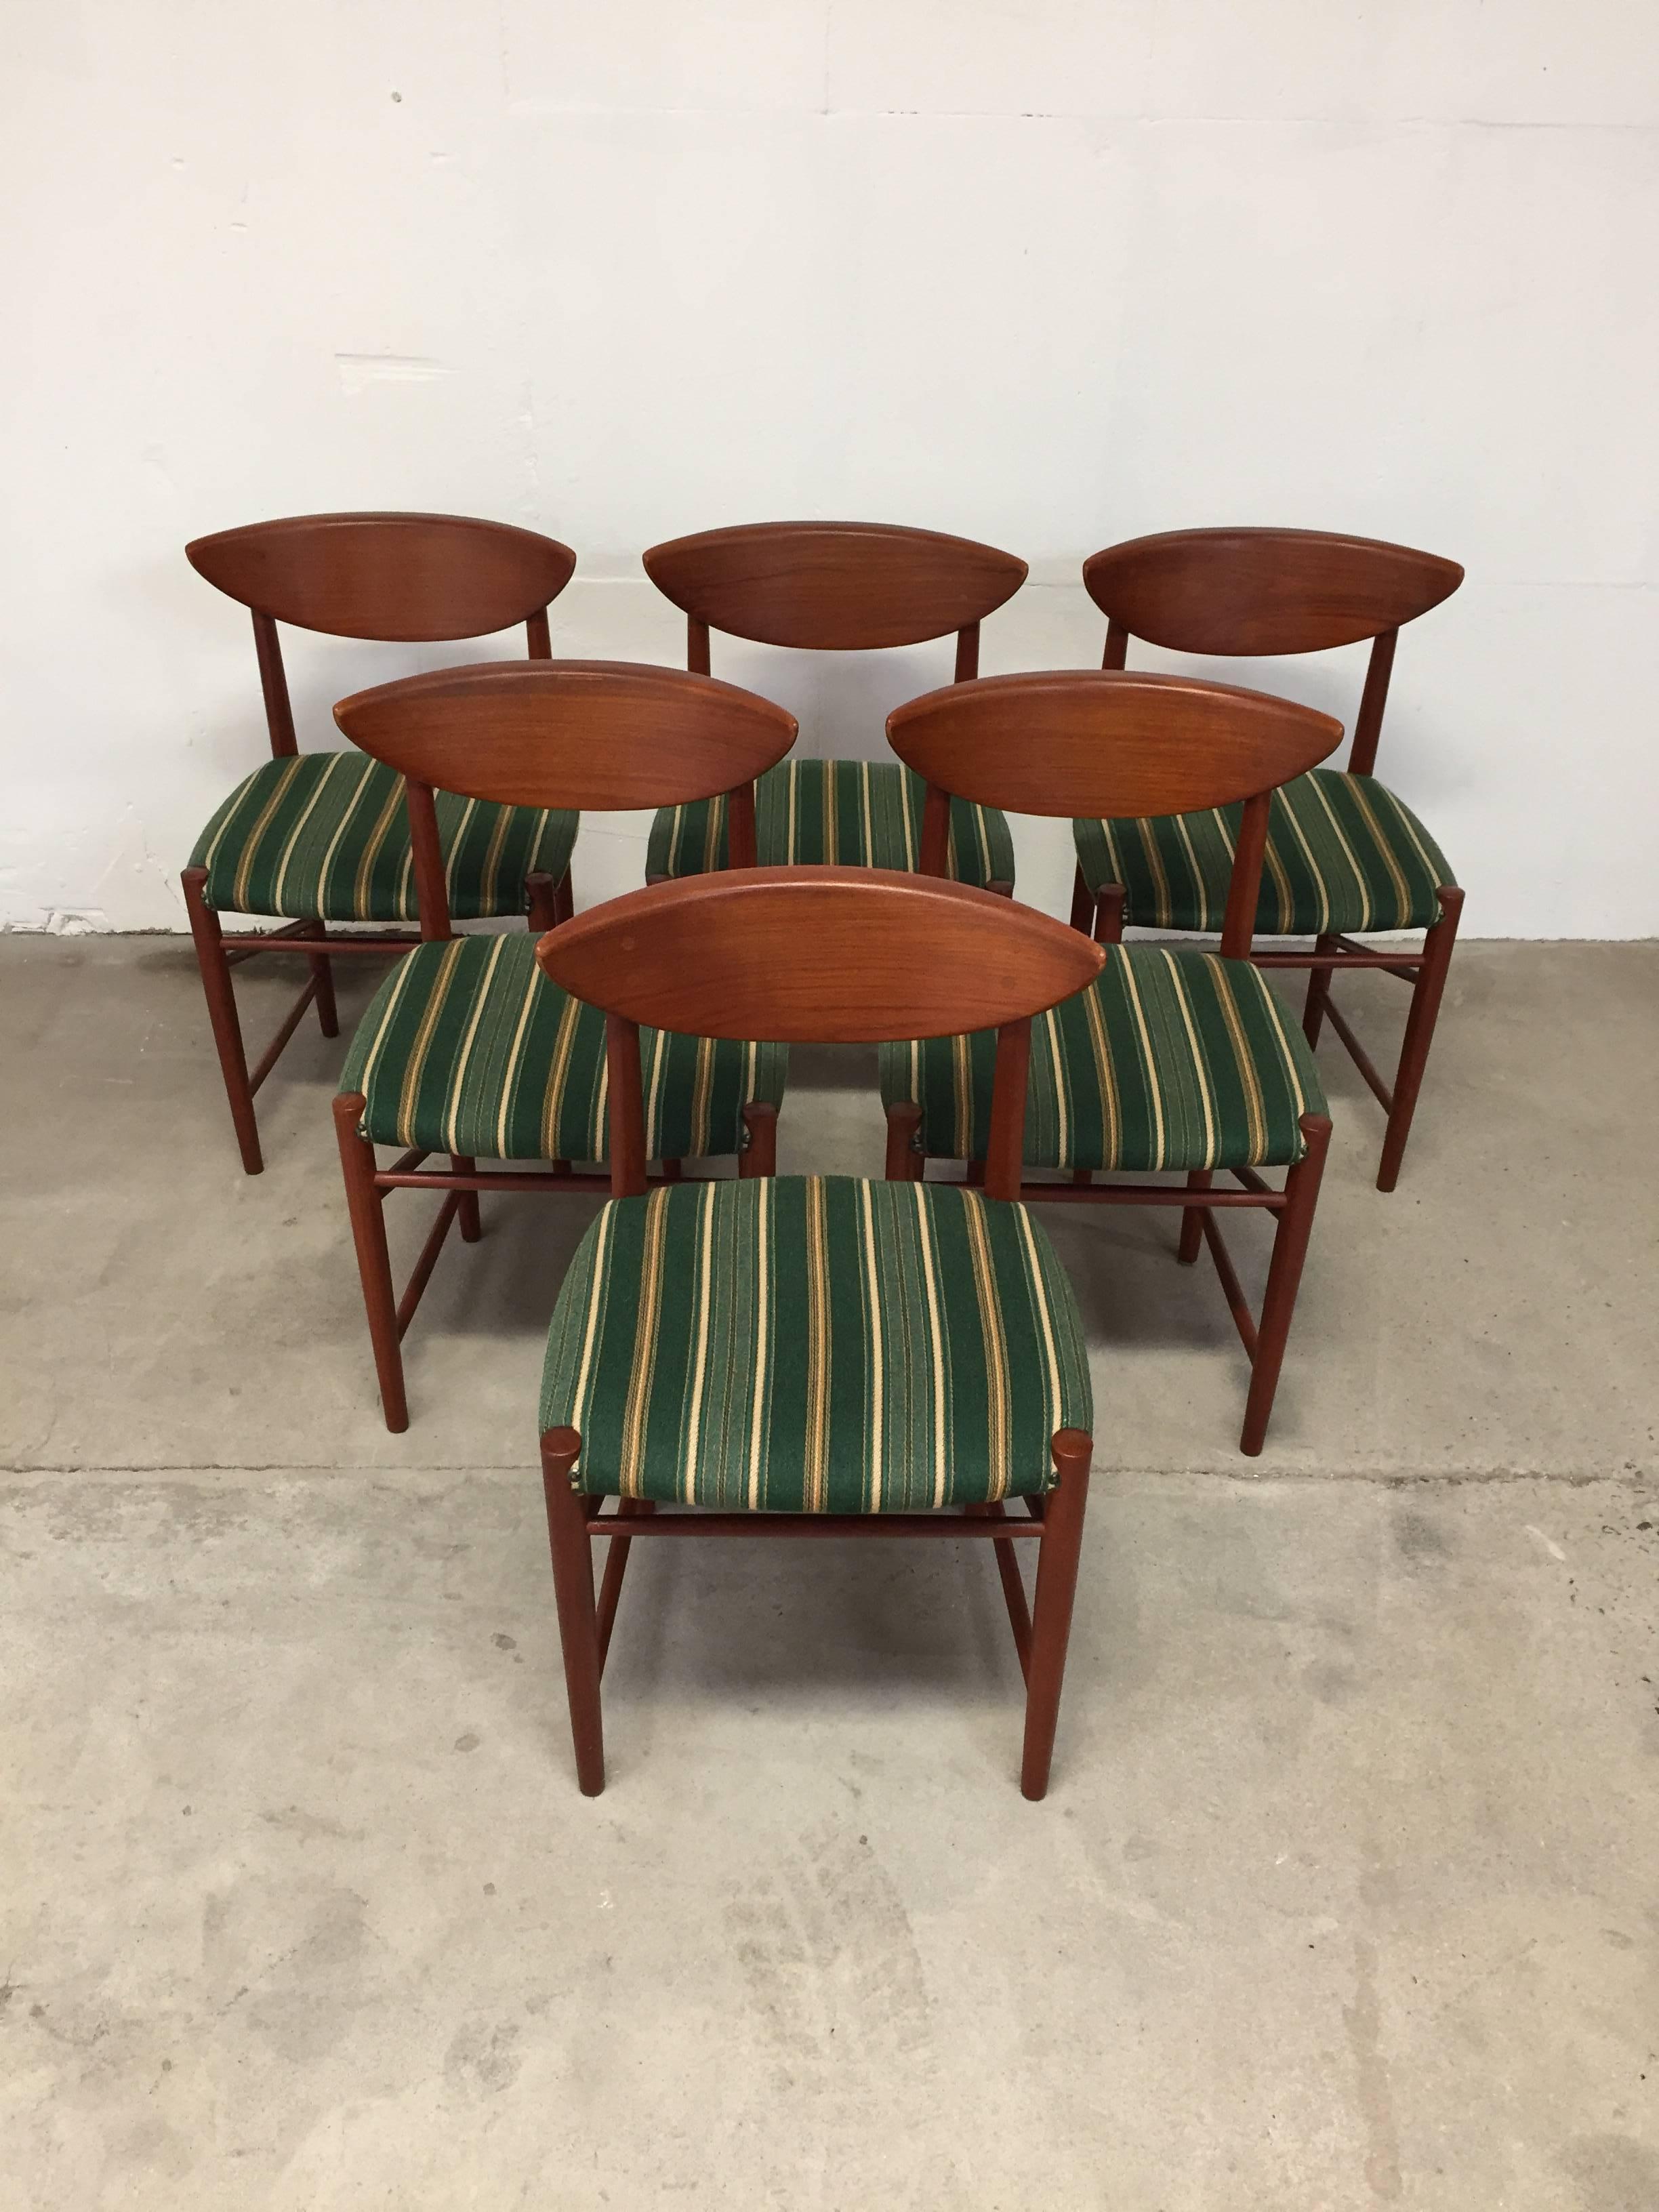 A beautiful set of teak dining chairs model 316 by Peter Hvidt and Orla Mølgaard Nielsen for Søborg Mobelfabrik. 

Classic and beautiful side profiles with detailed lower leg crossbars, displaying the finest craftsmanship and design the